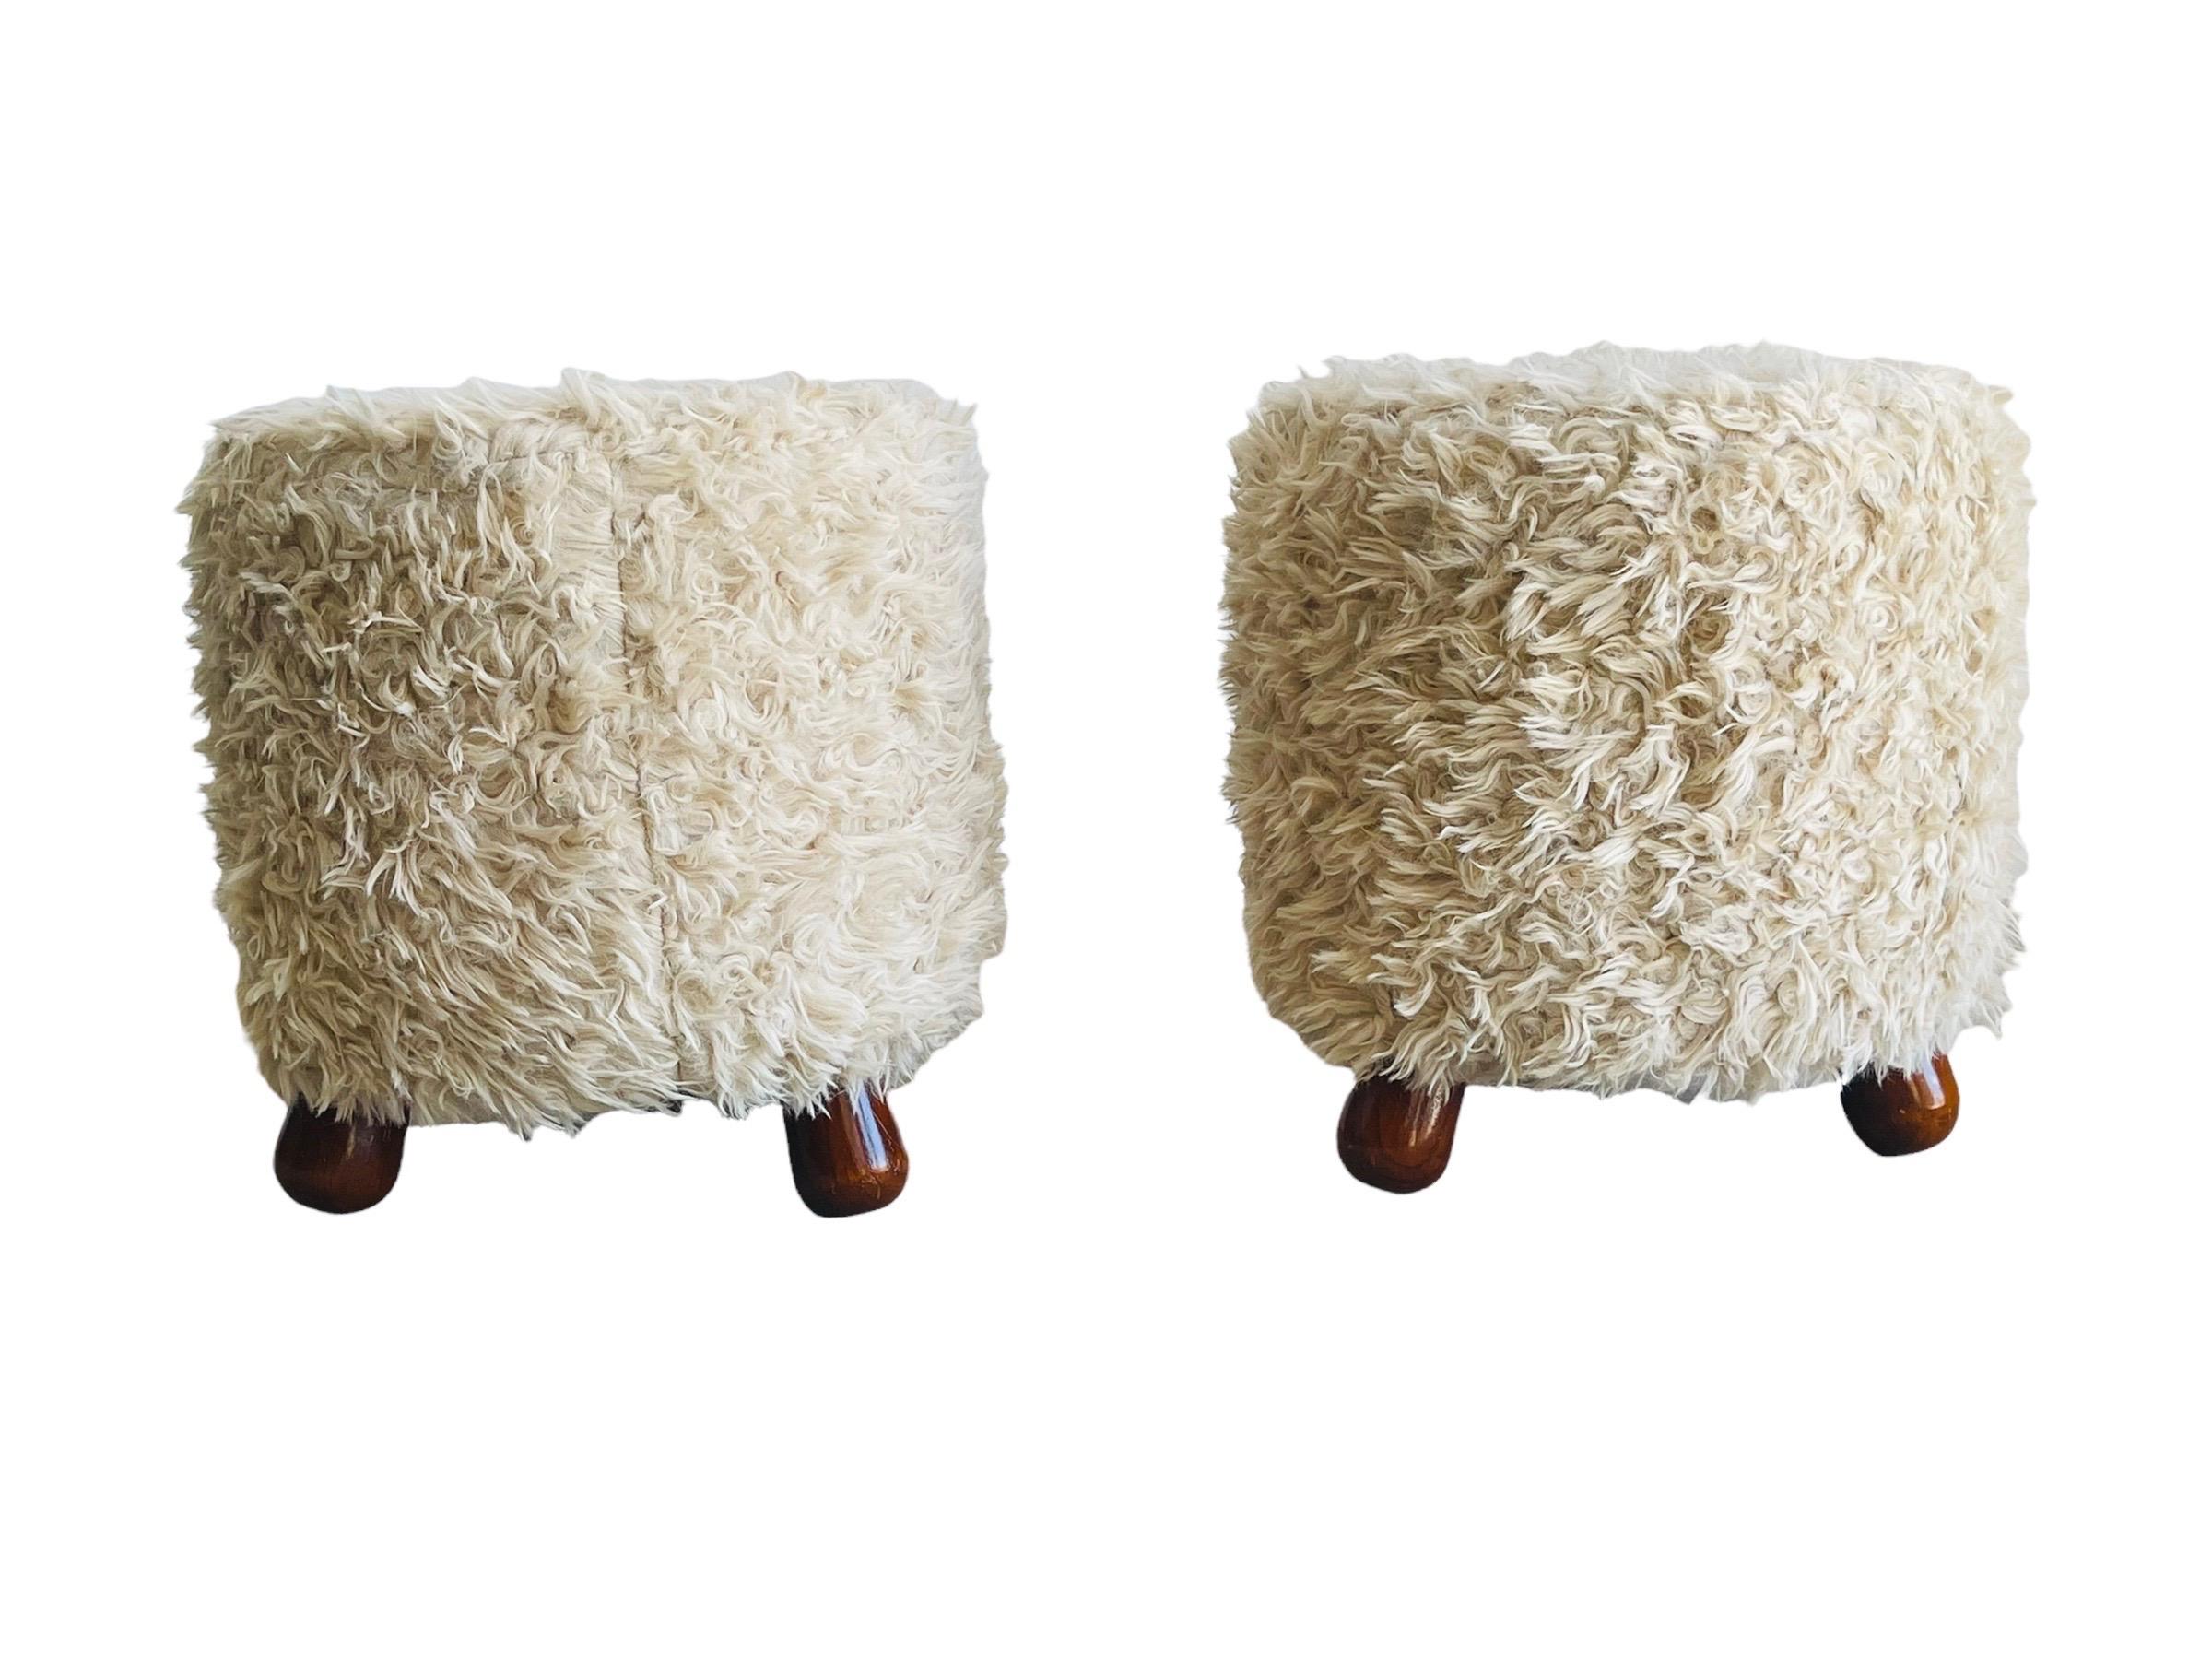 Pair of Fuzzy stools. The stools sit in a tripod turned legs and upholstery in creamy fuzzy upholstery. The stools are in good vintage condition with normal wear consistent with age and use. 

Measures: 15” tall x 13” round.